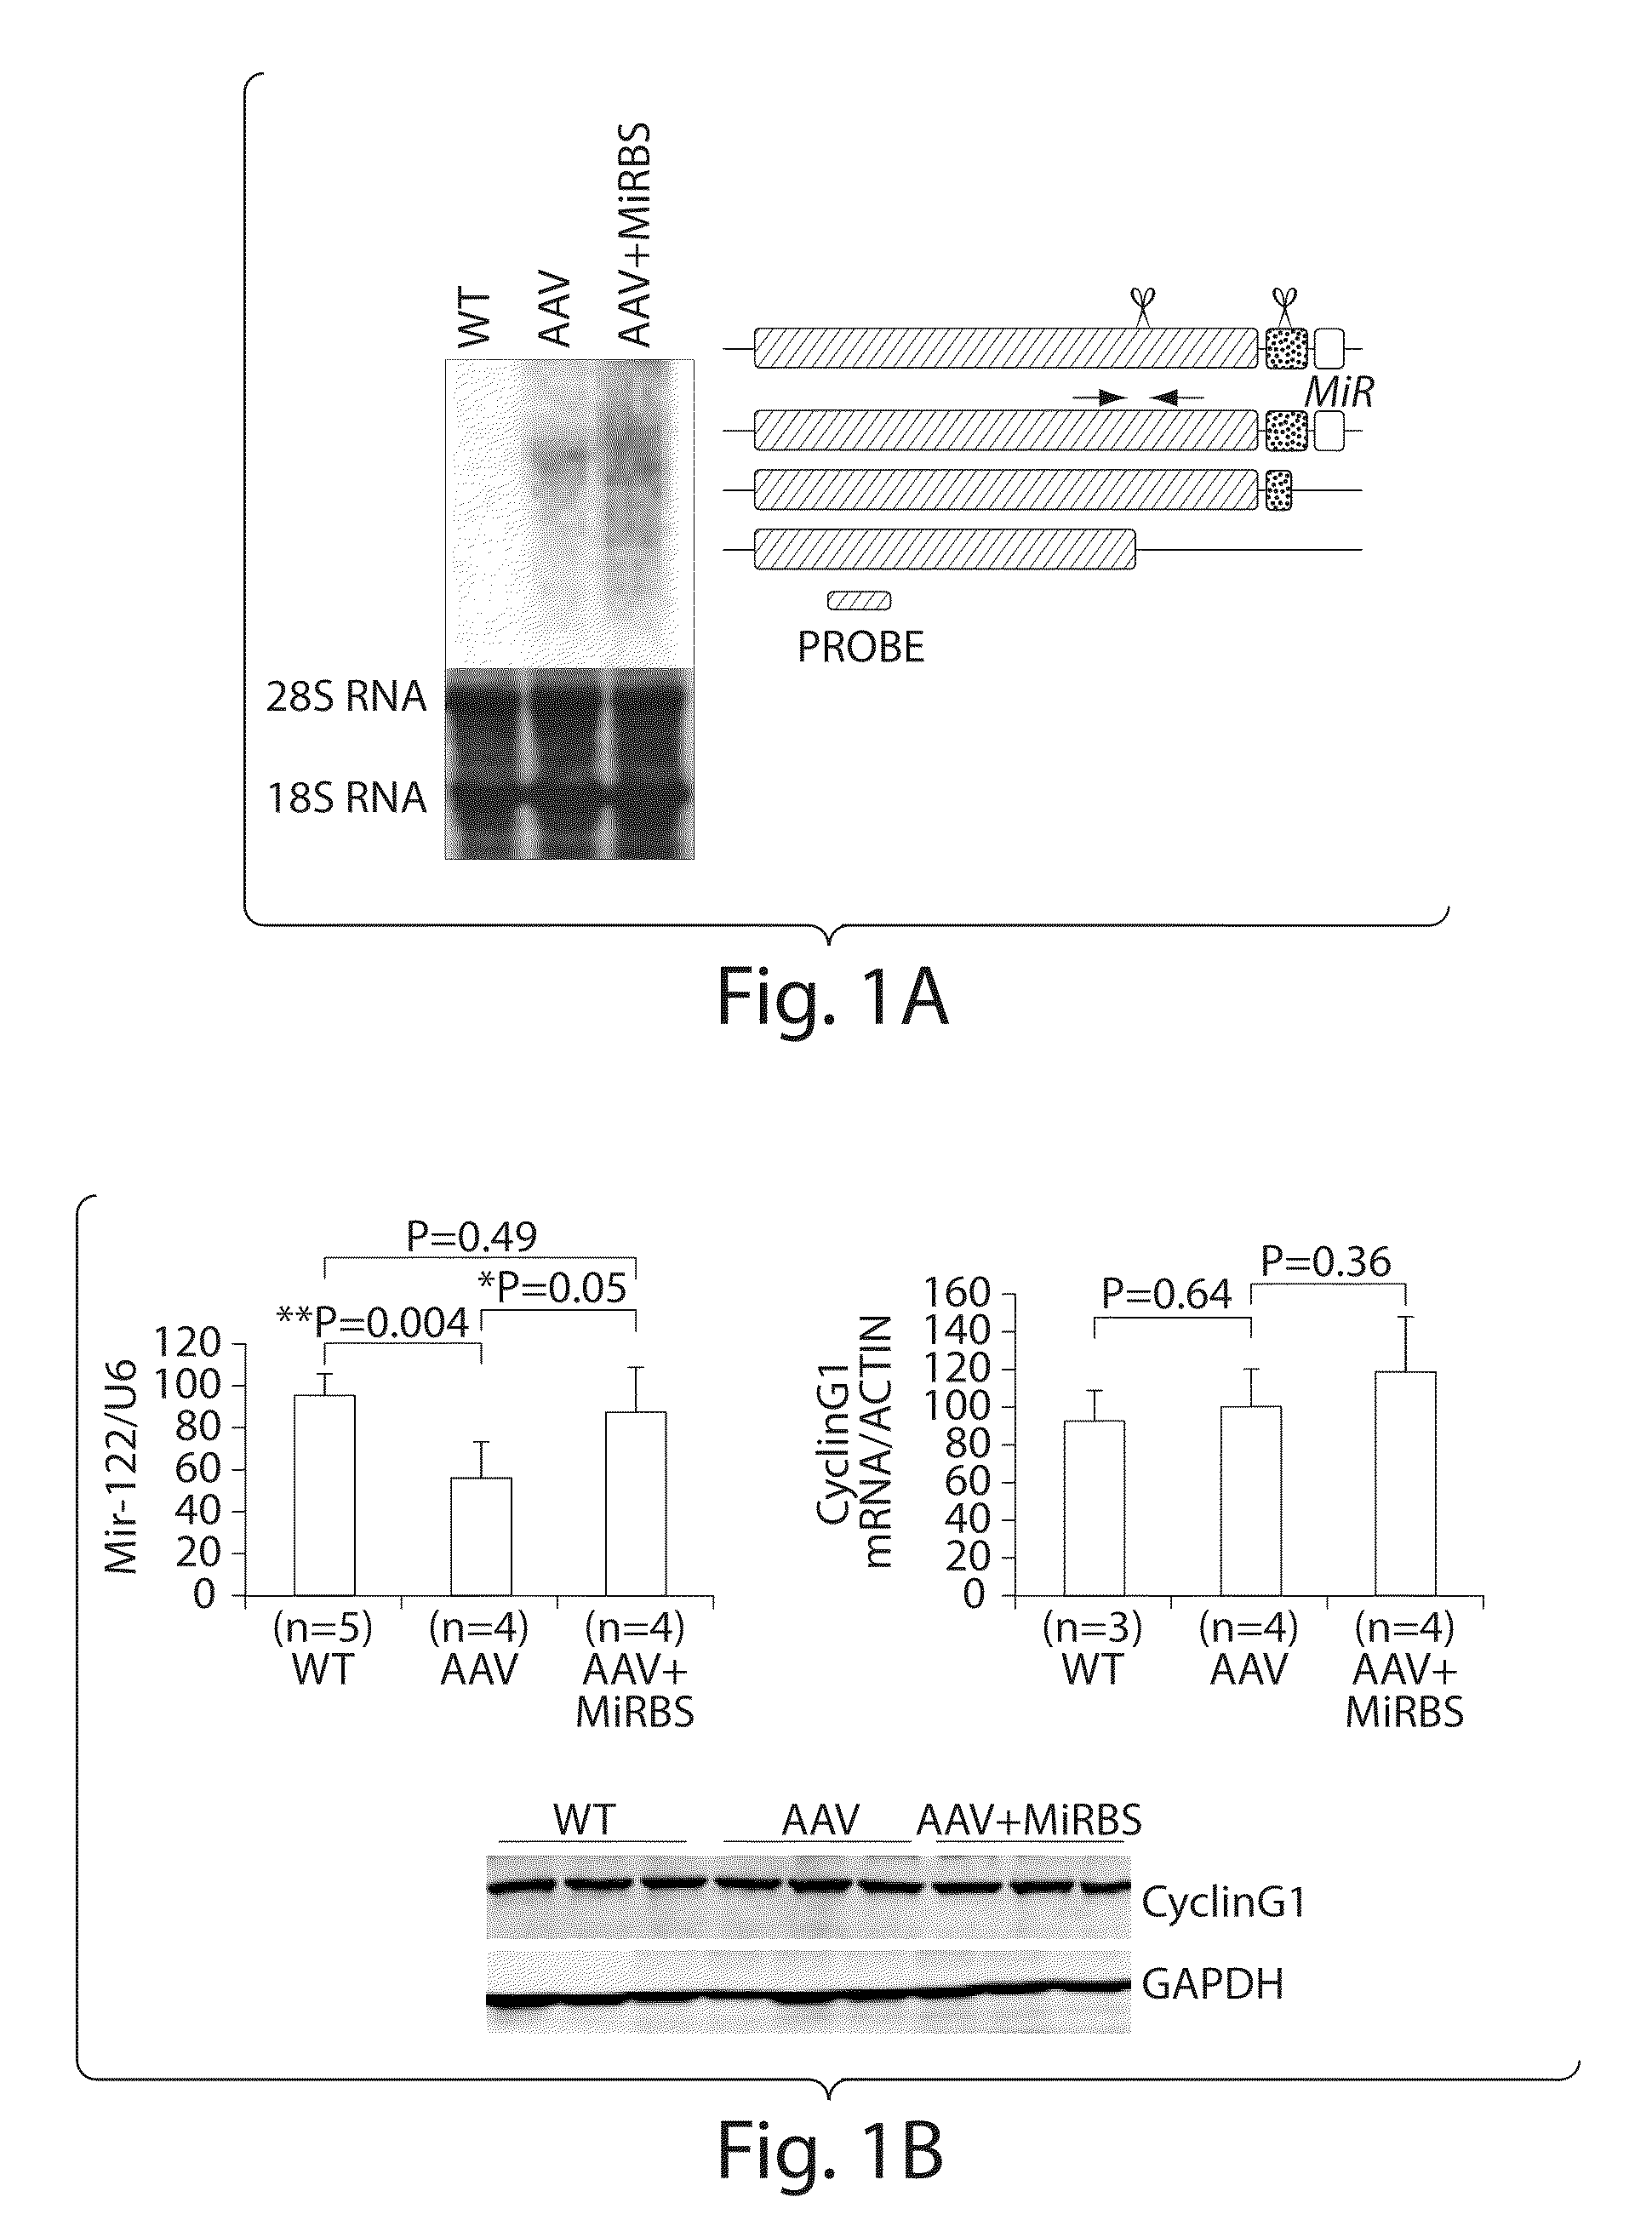 Isolation of novel AAV'S and uses thereof